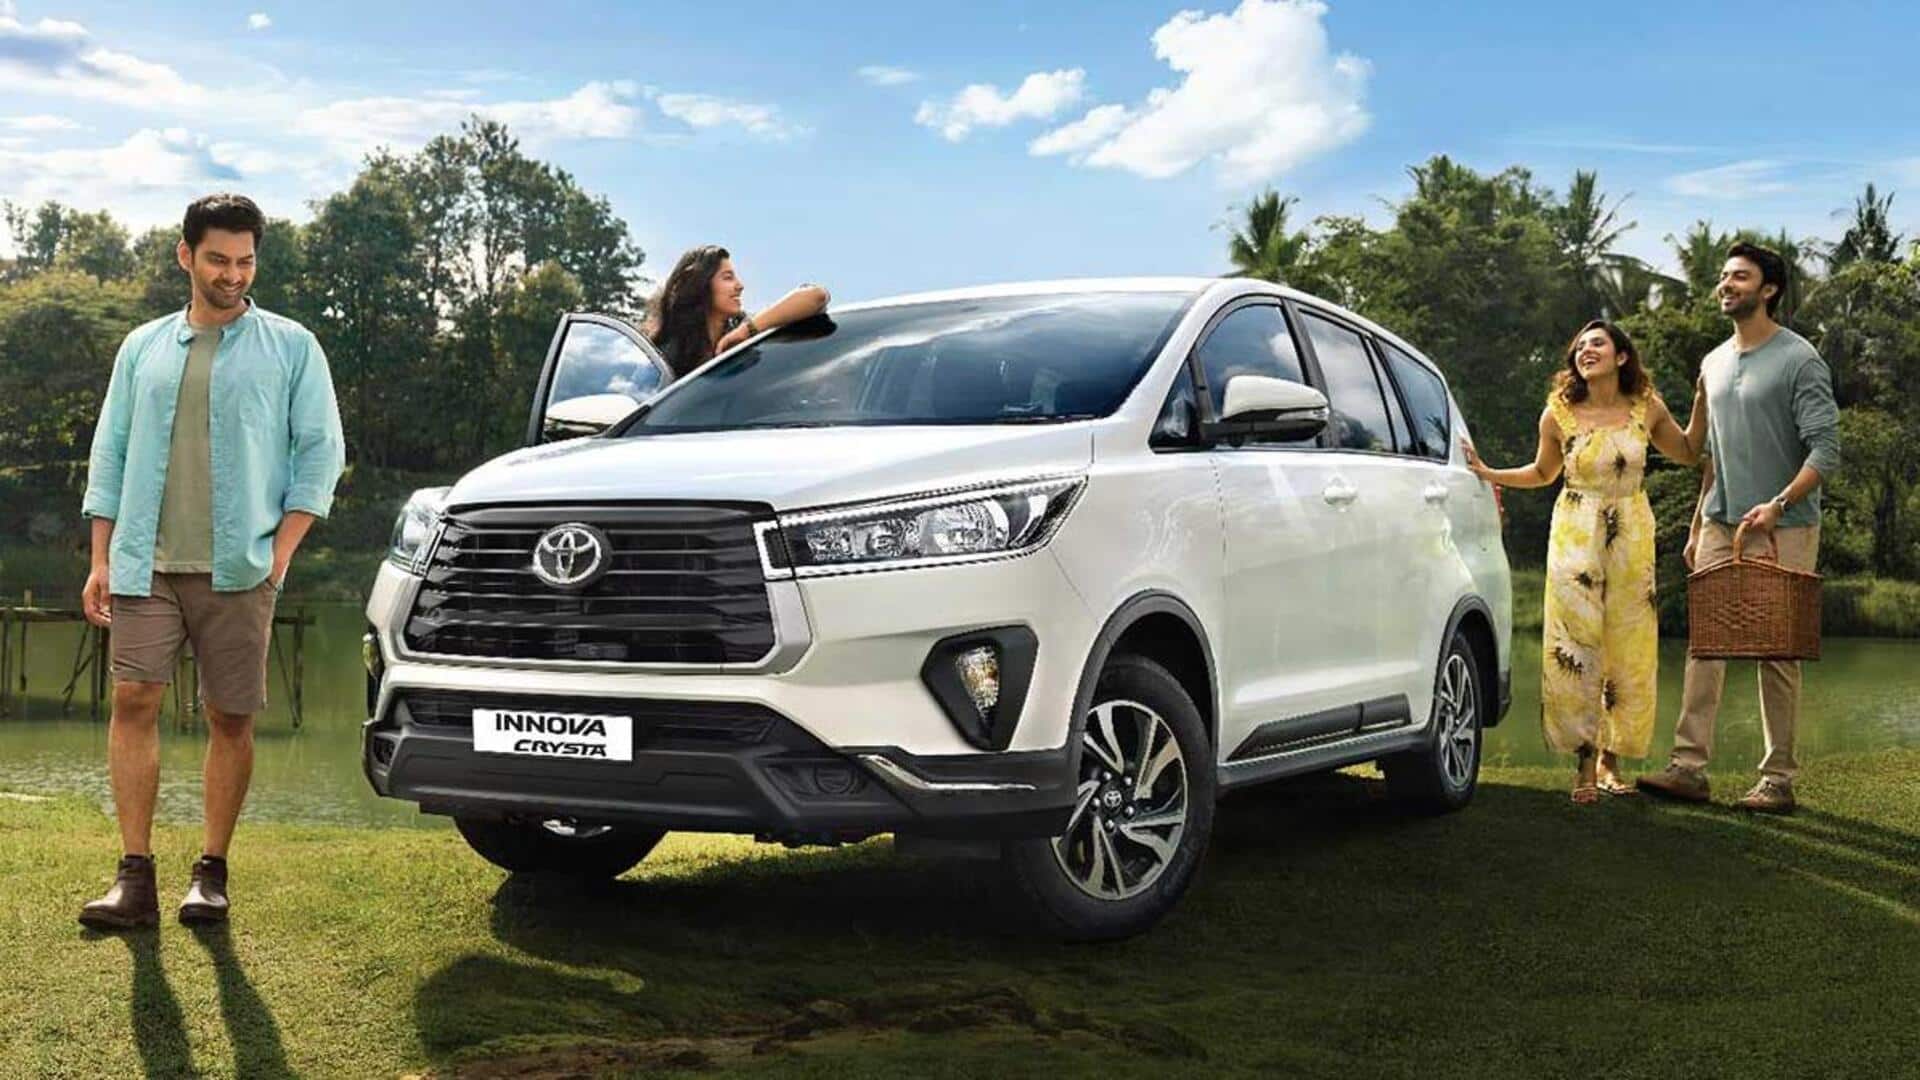 Toyota Innova Crysta GX Limited Edition launched: Check pricing, features